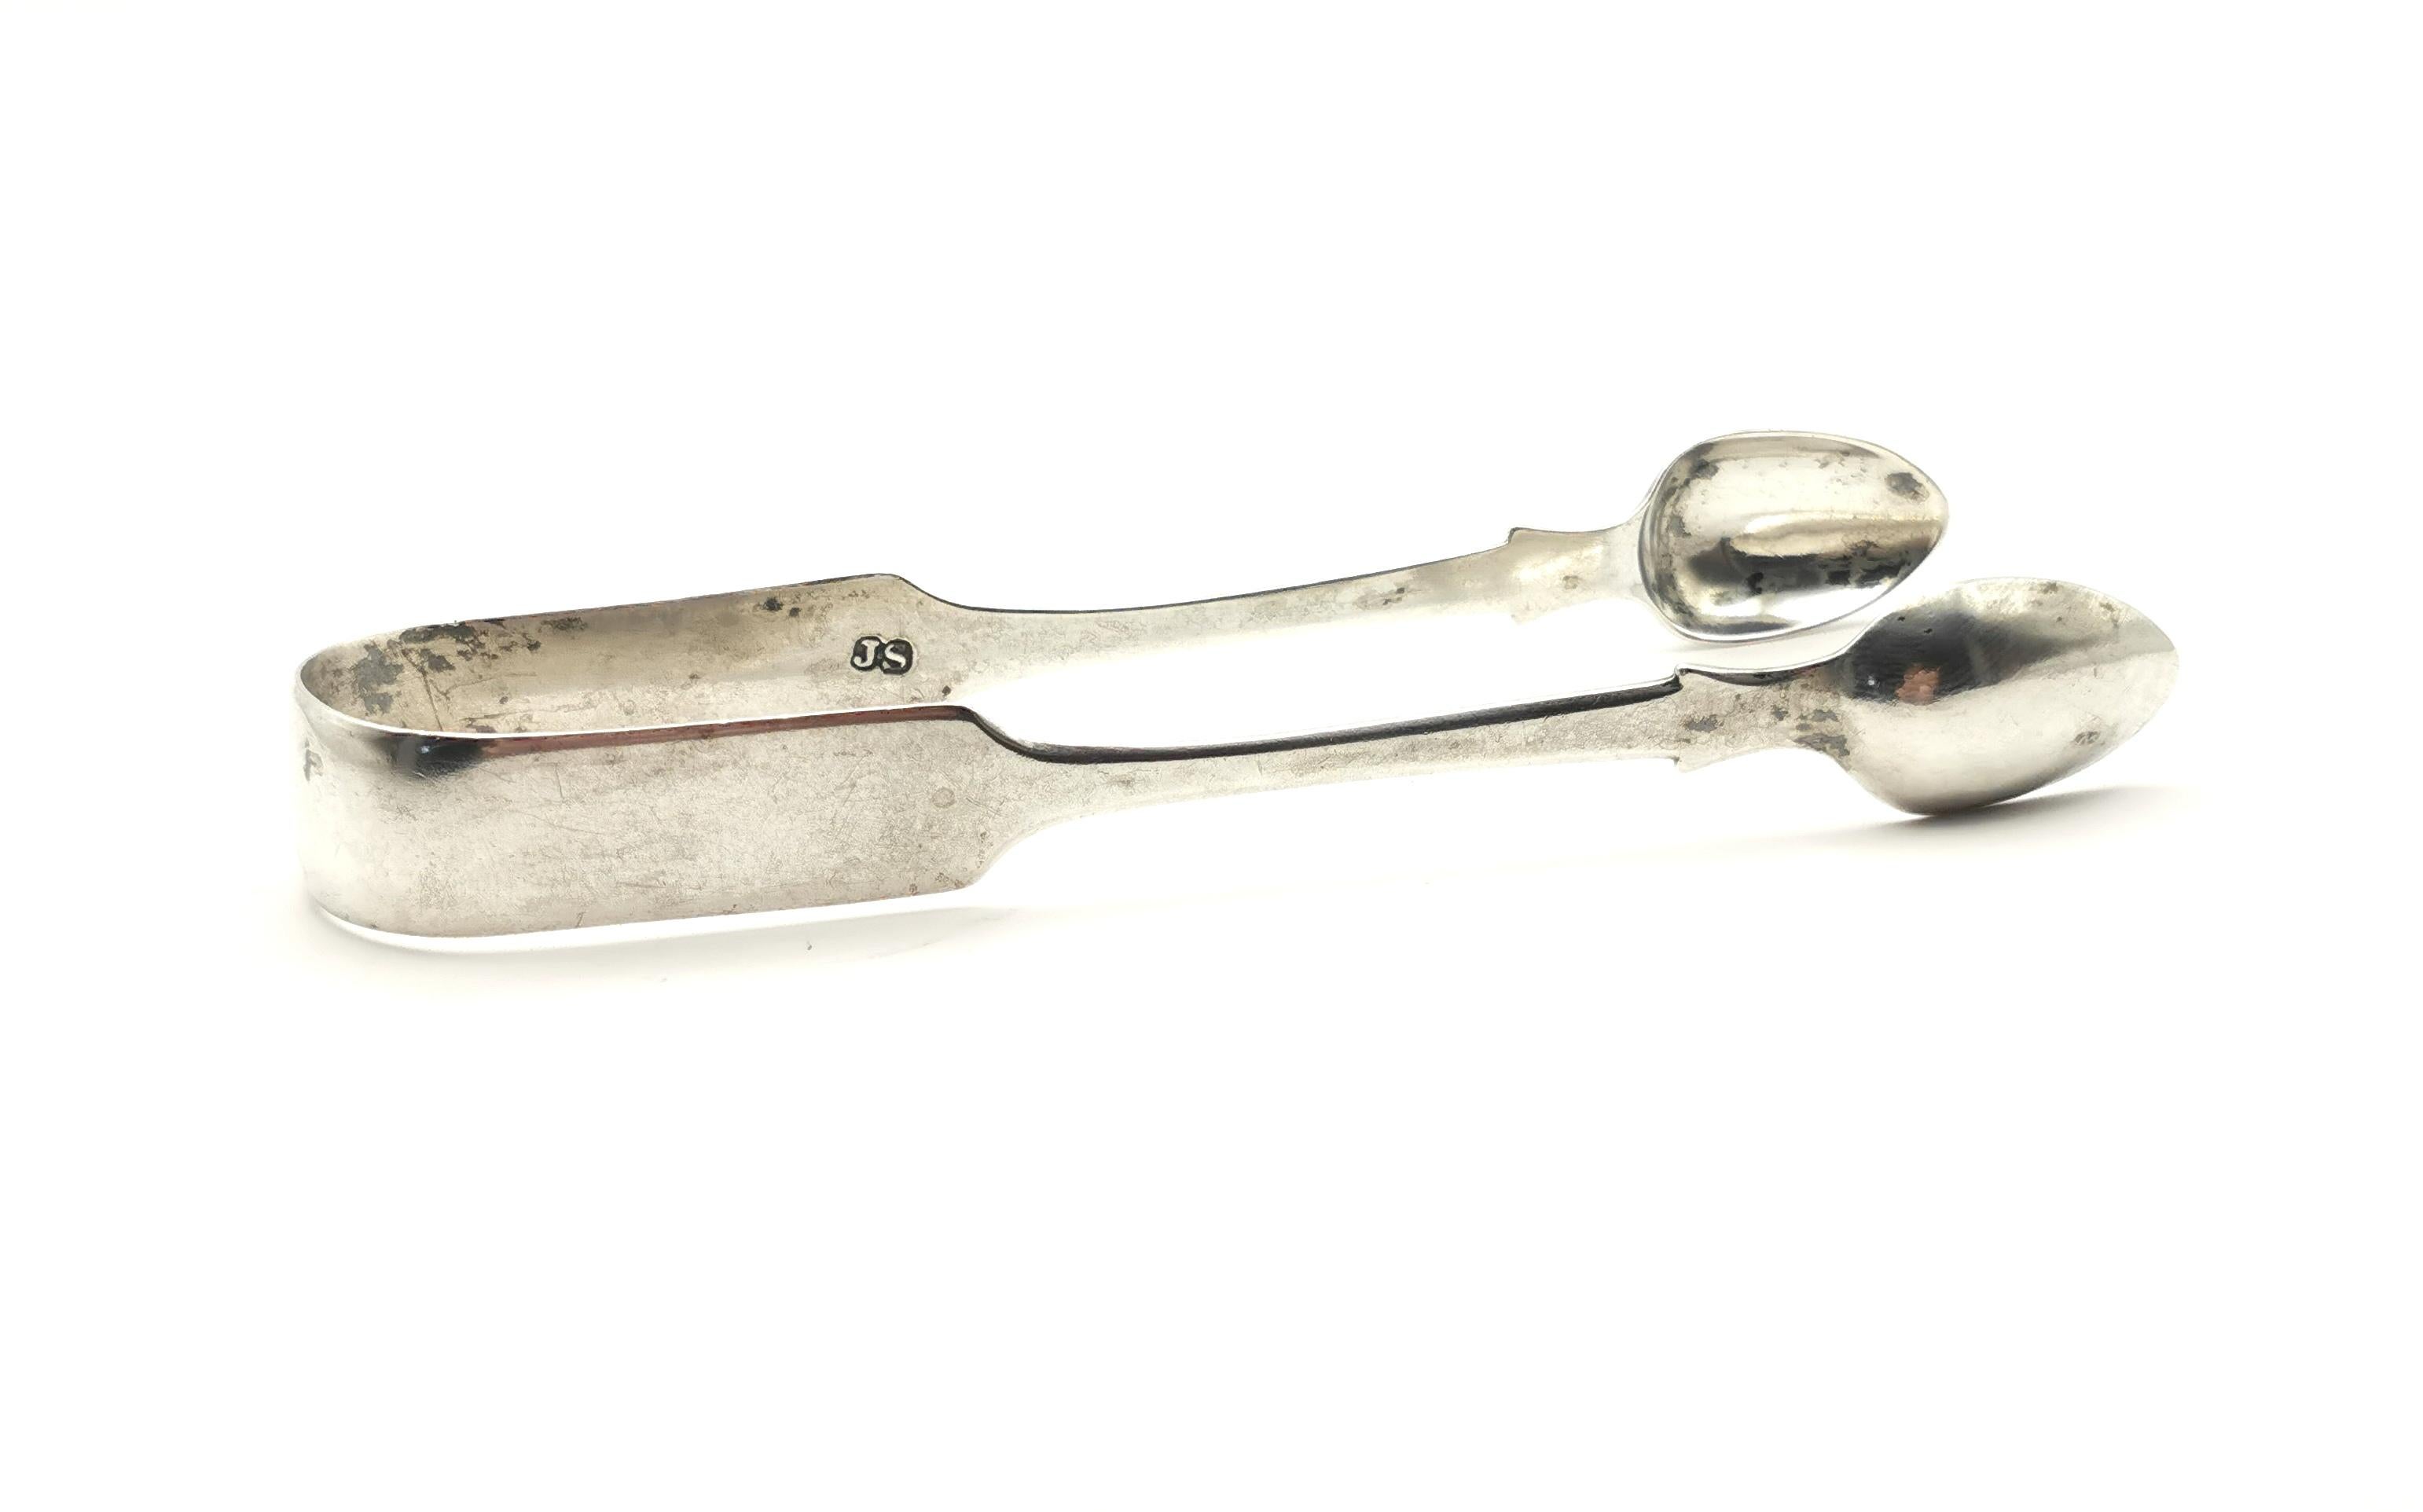 A large pair of antique Victorian era sterling silver sugar tongs.

A relatively plain design, no engraving, they are substantial pair, large with a good weight to them.

They hail from Exeter which is a lesser seen hallmark than London or